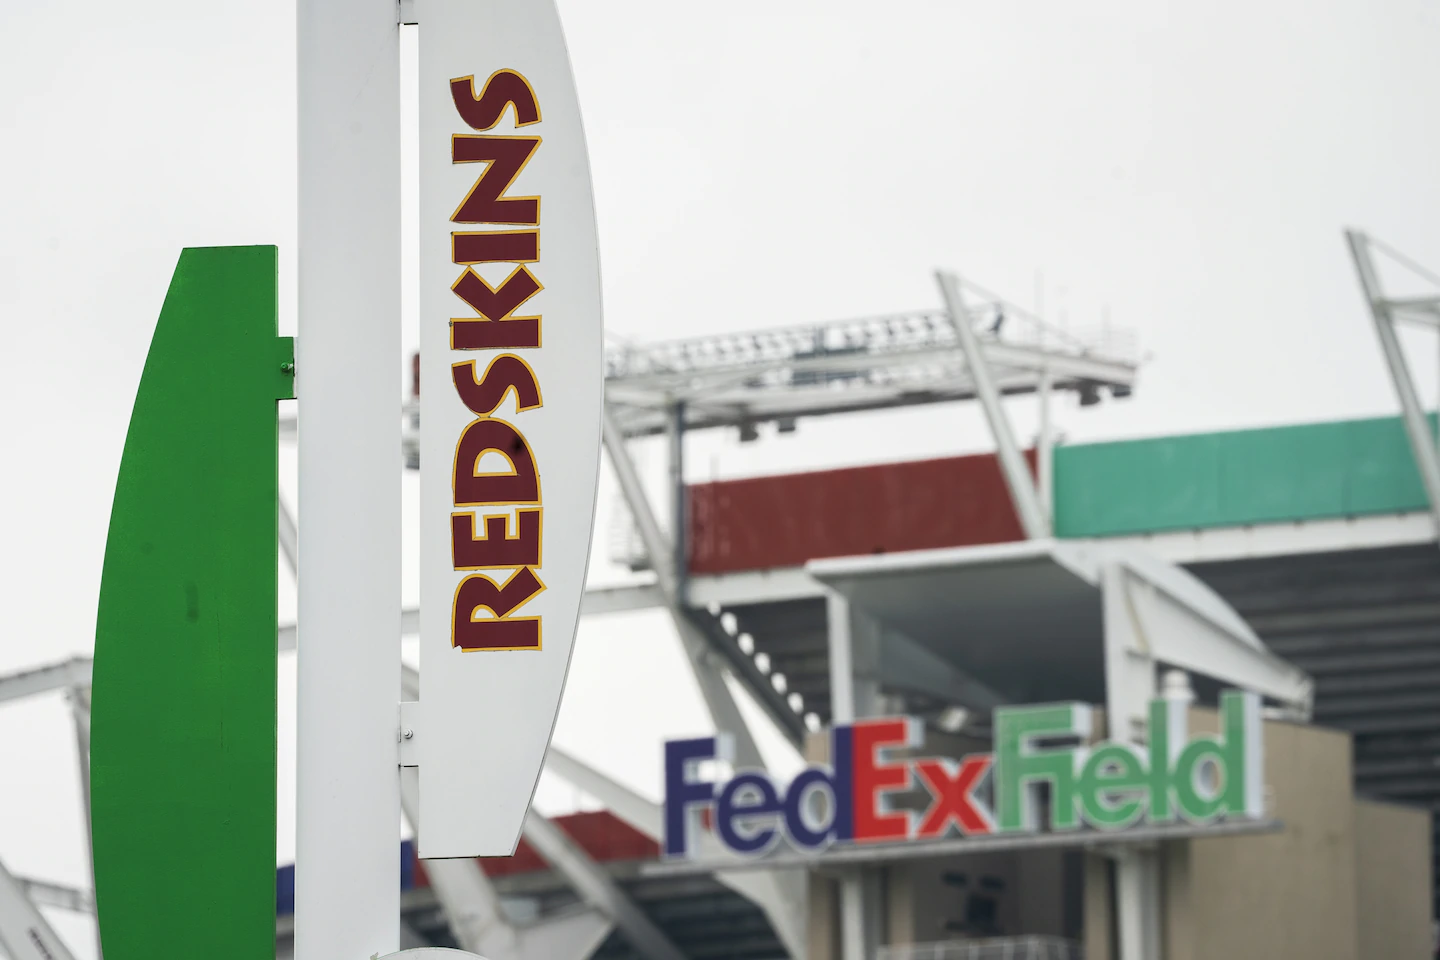 FedEx letter to Redskins: Change the name or lose stadium signage